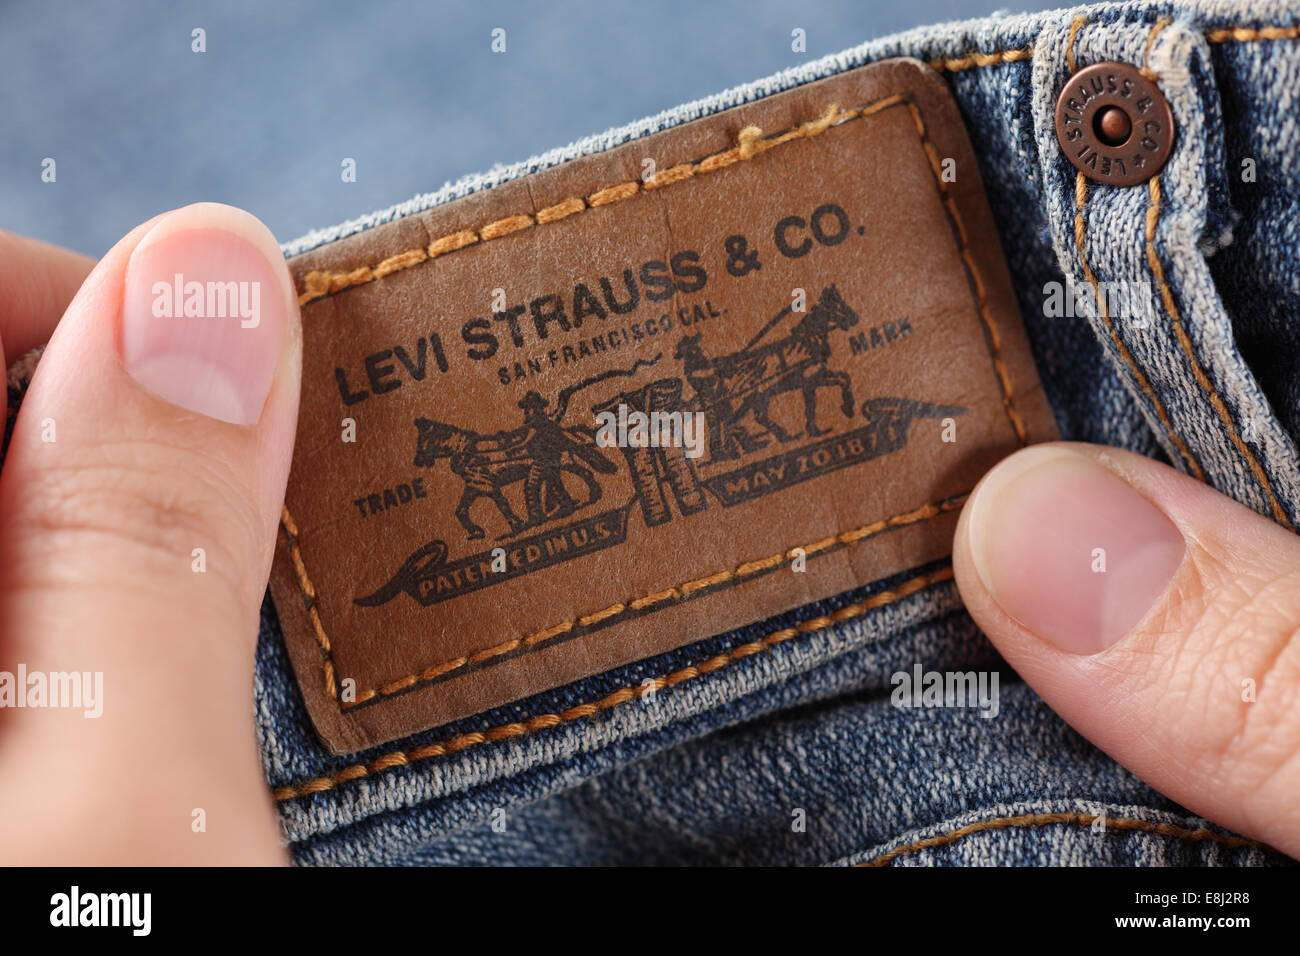 Tambov, Russian Federation - October 21, 2012: Woman's hands holding label logo of a pair Levi's Jeans. Stock Photo